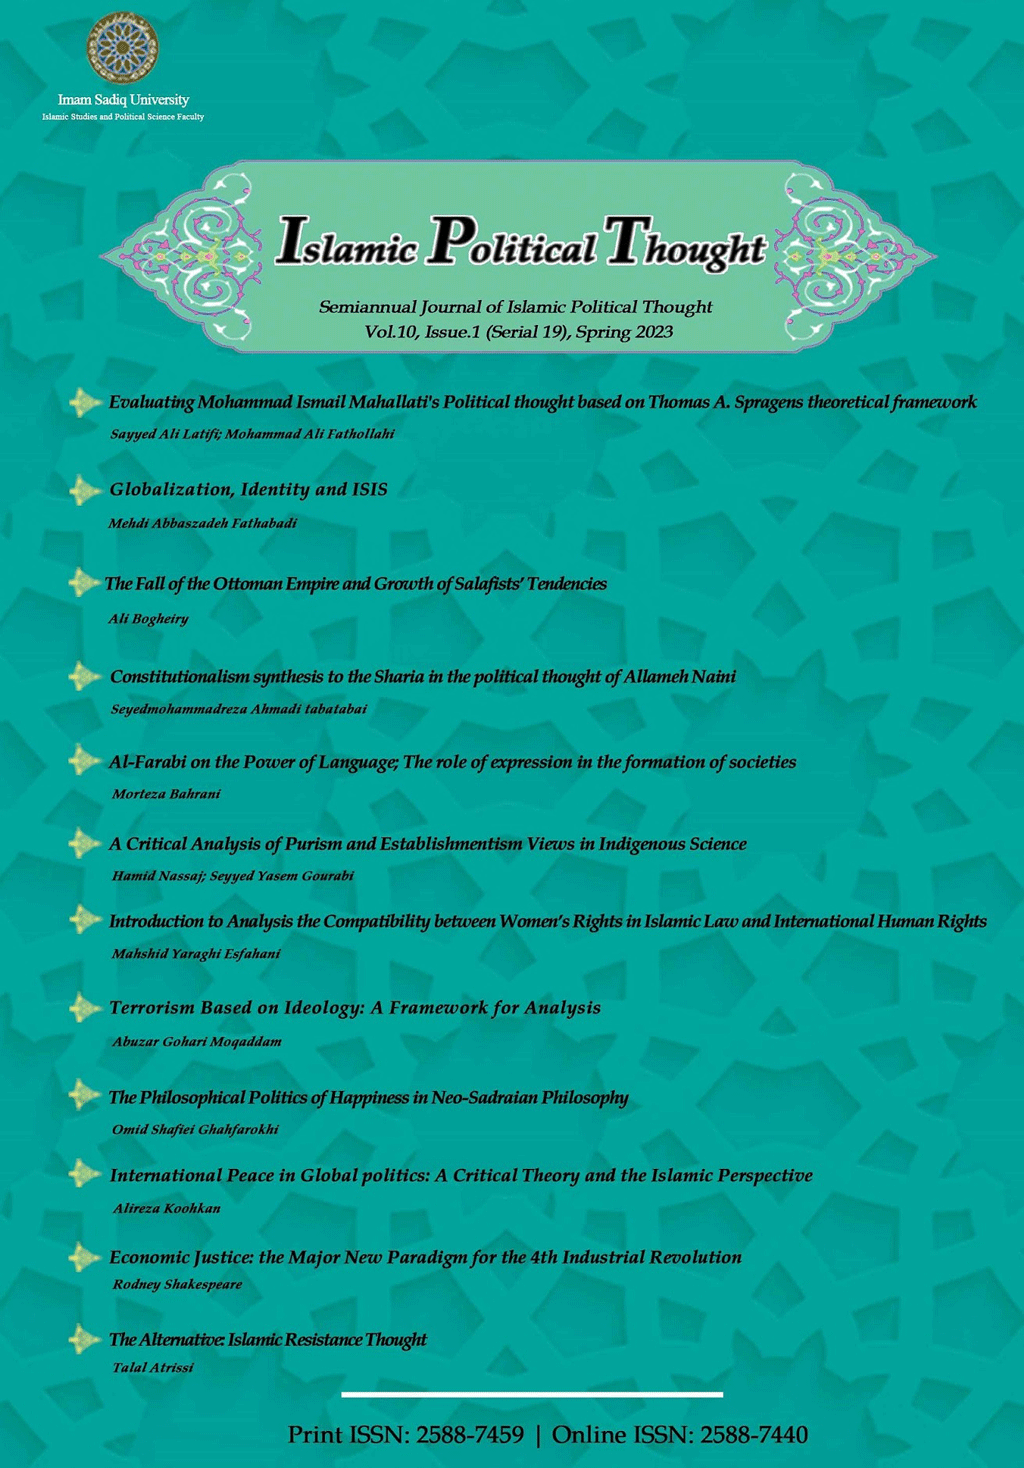 Islamic Political Thoughts - Fall 2020, Volume 7 - Number 2